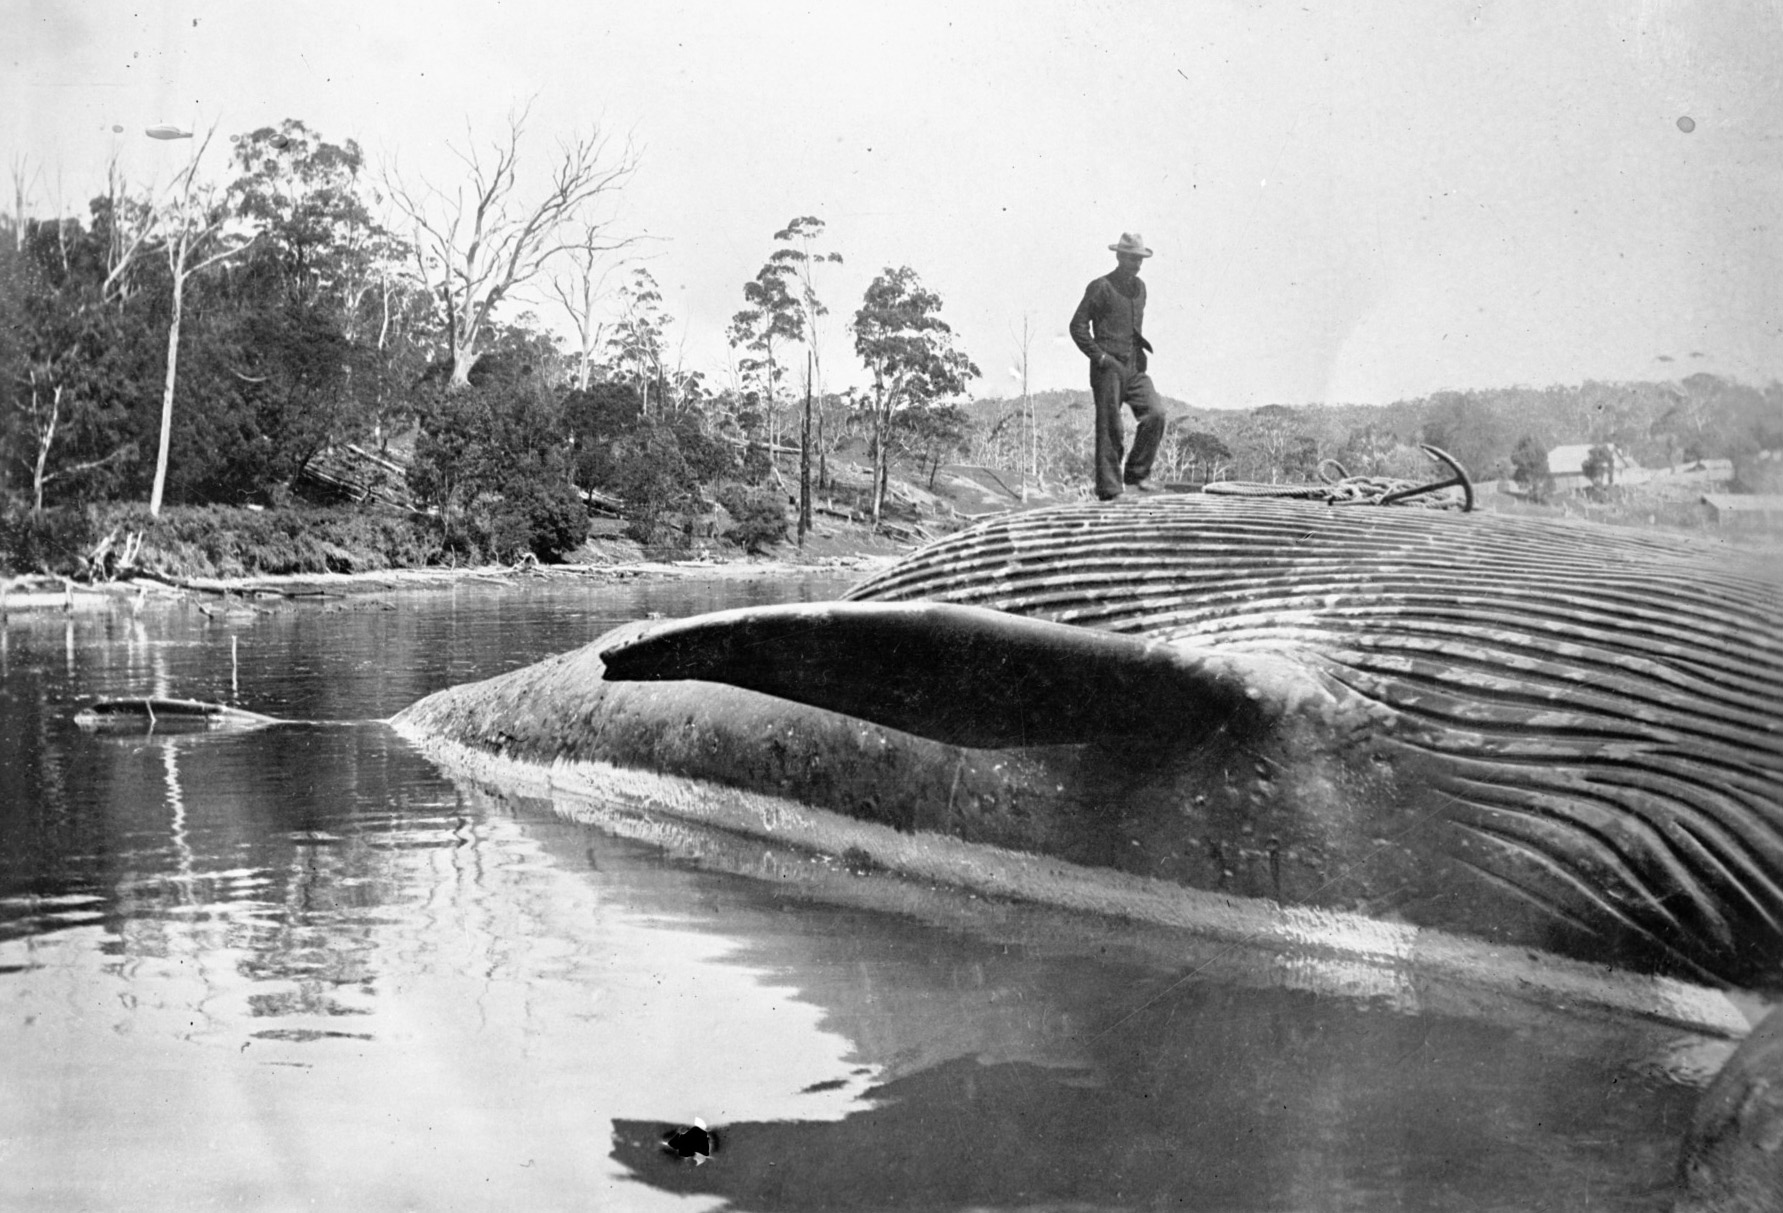 A man on a dead whale, Twofold Bay, New South Wales